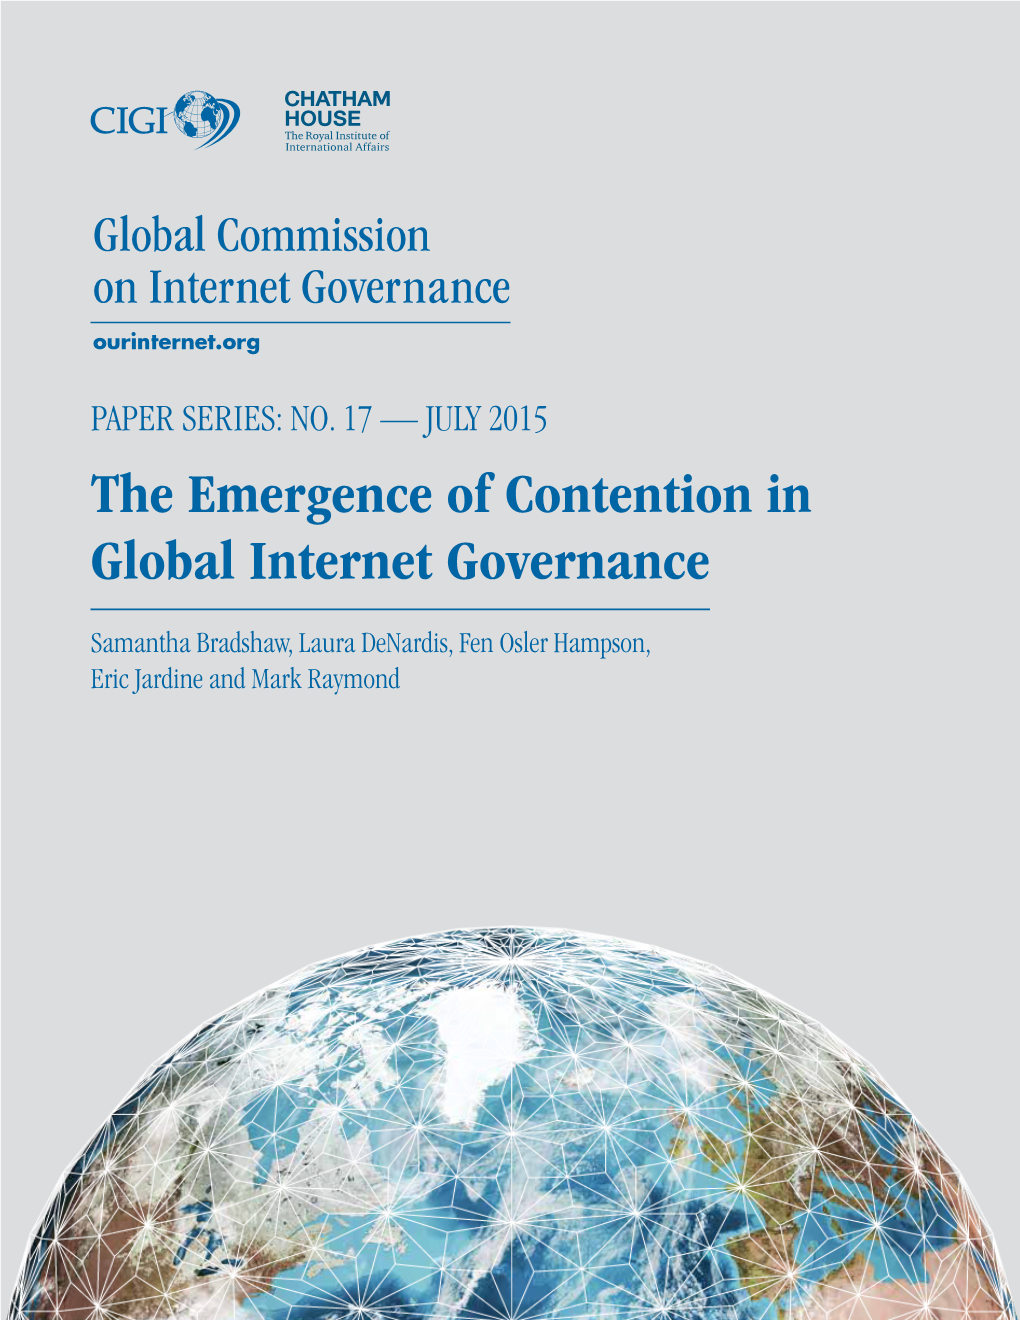 The Emergence of Contention in Global Internet Governance